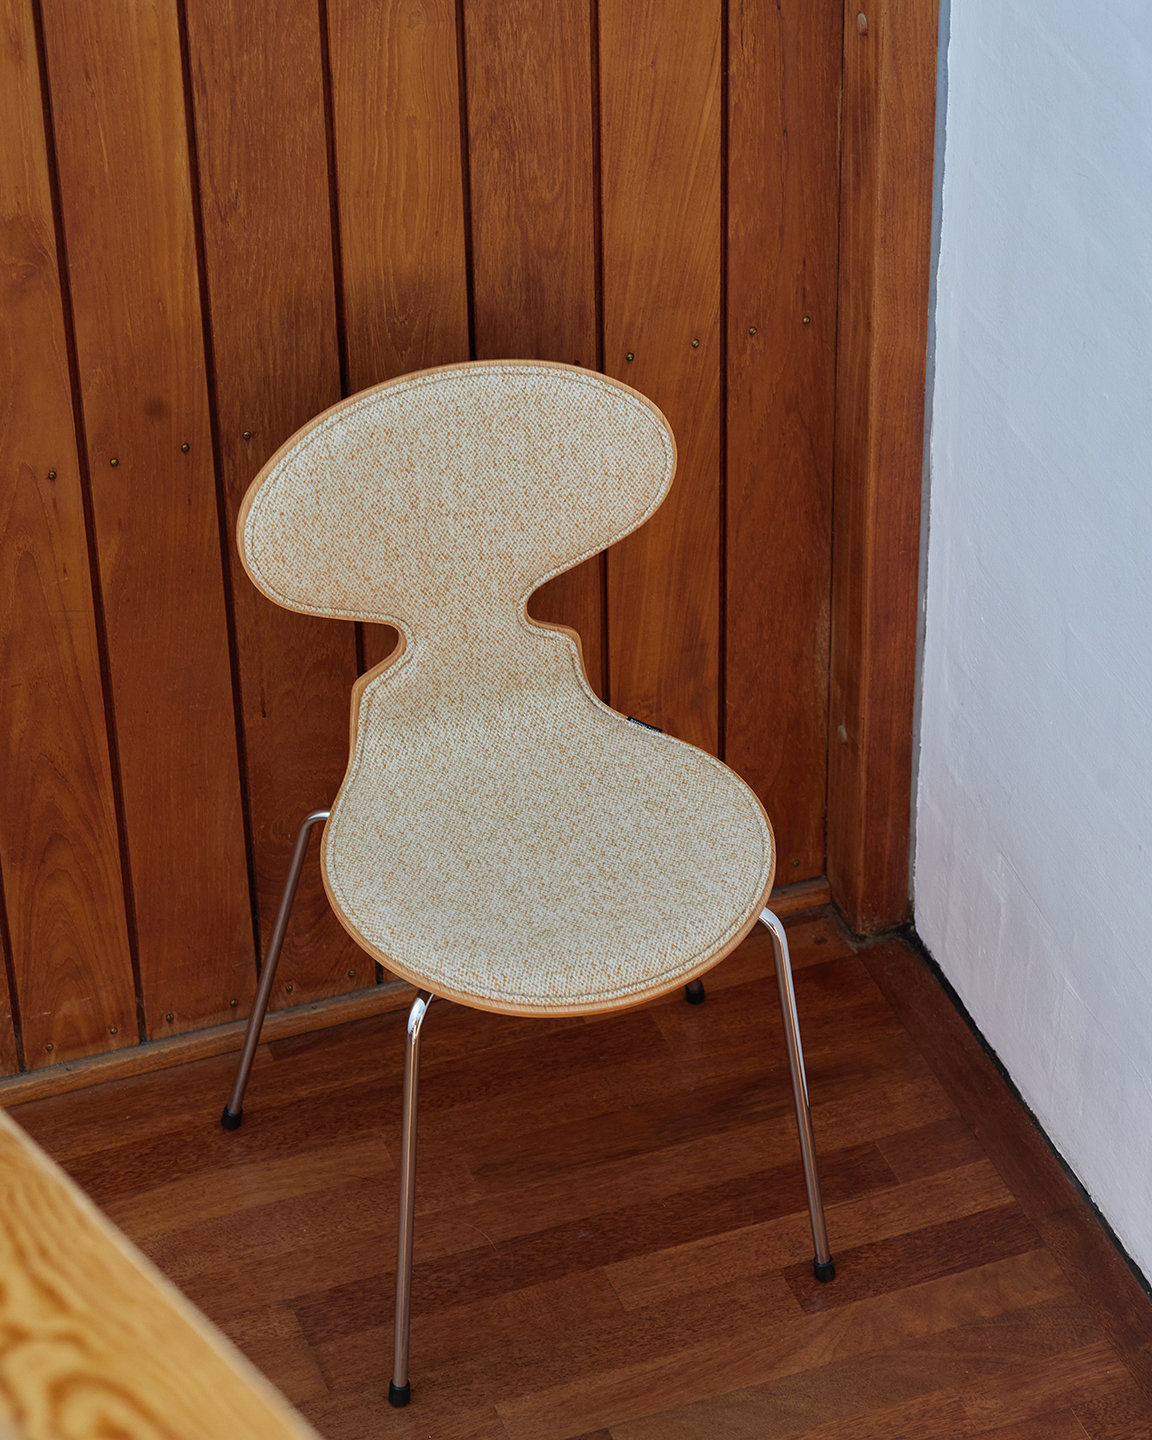 The Ant chair with front upholstery